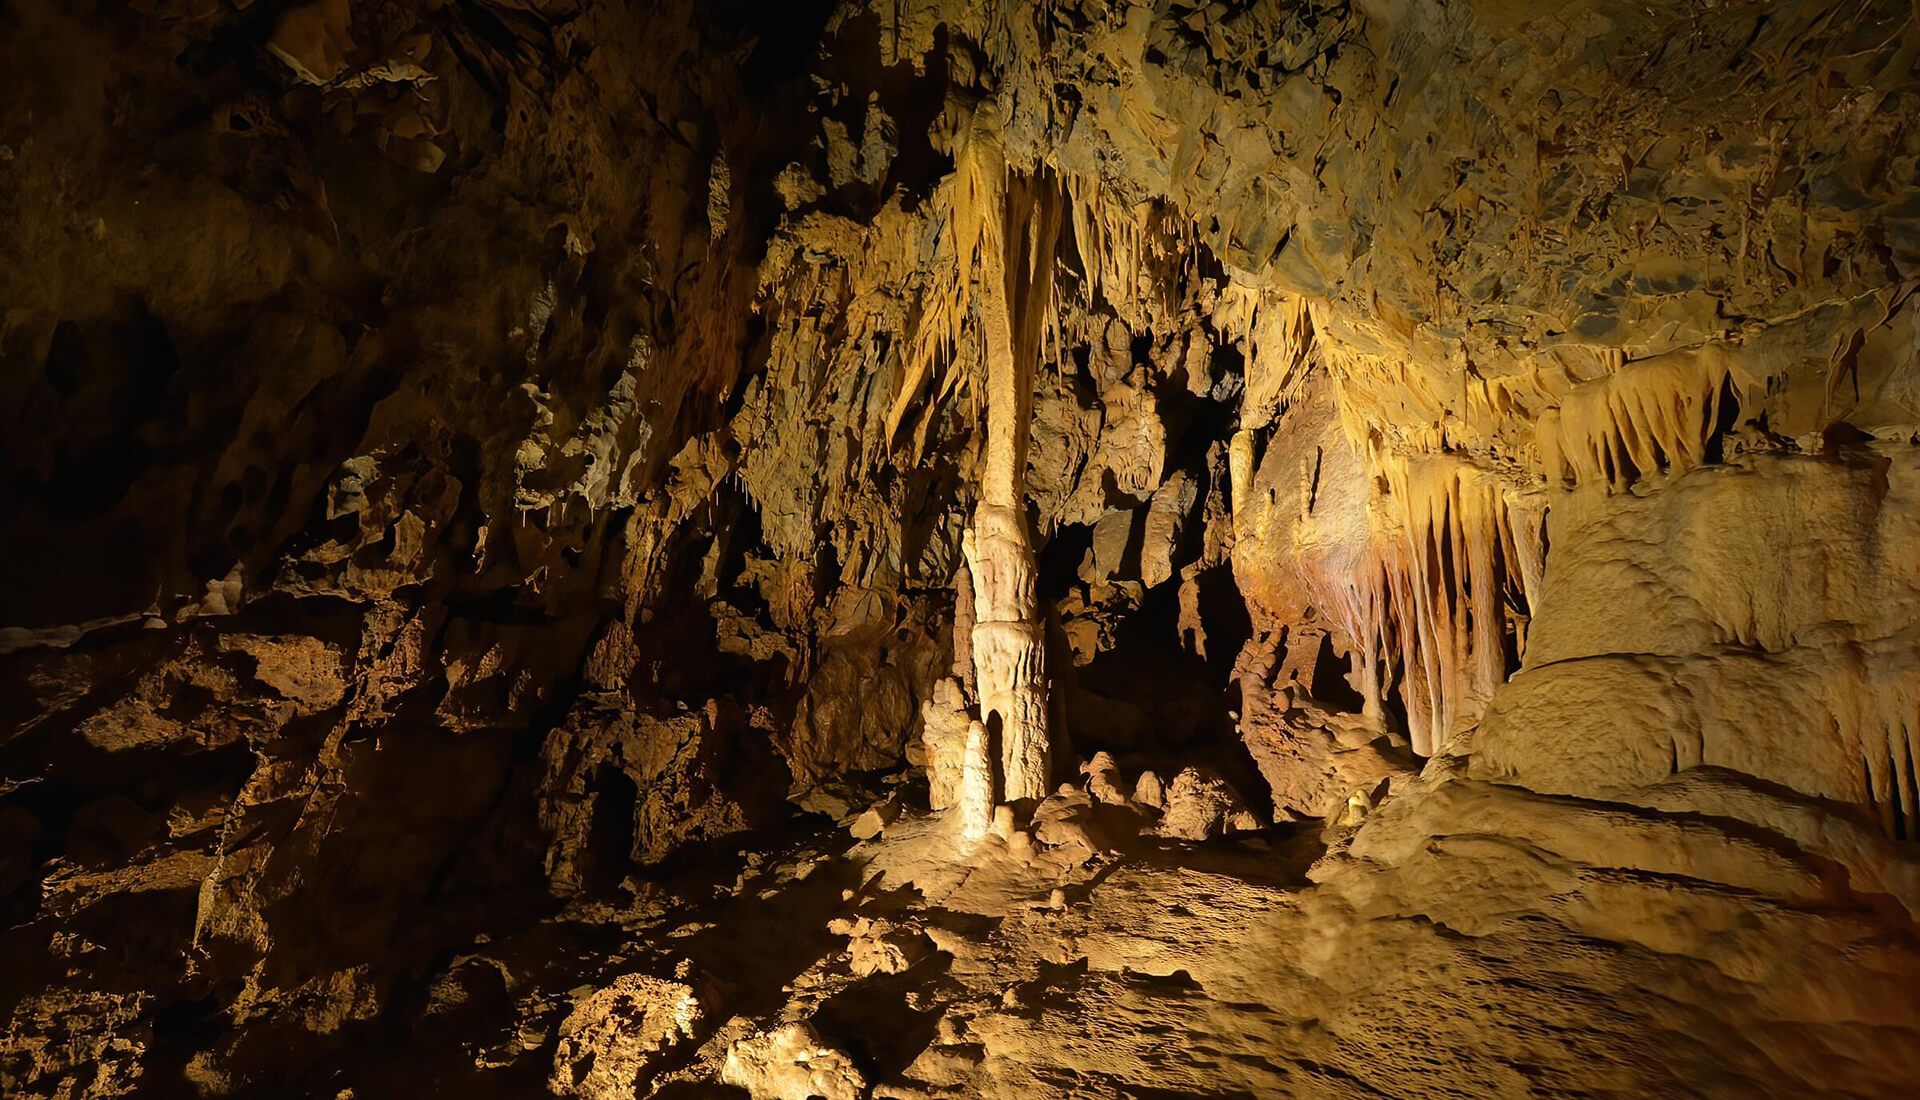 A picture of the inside of kapsia cave depicting one of the main rooms and a big stalactite